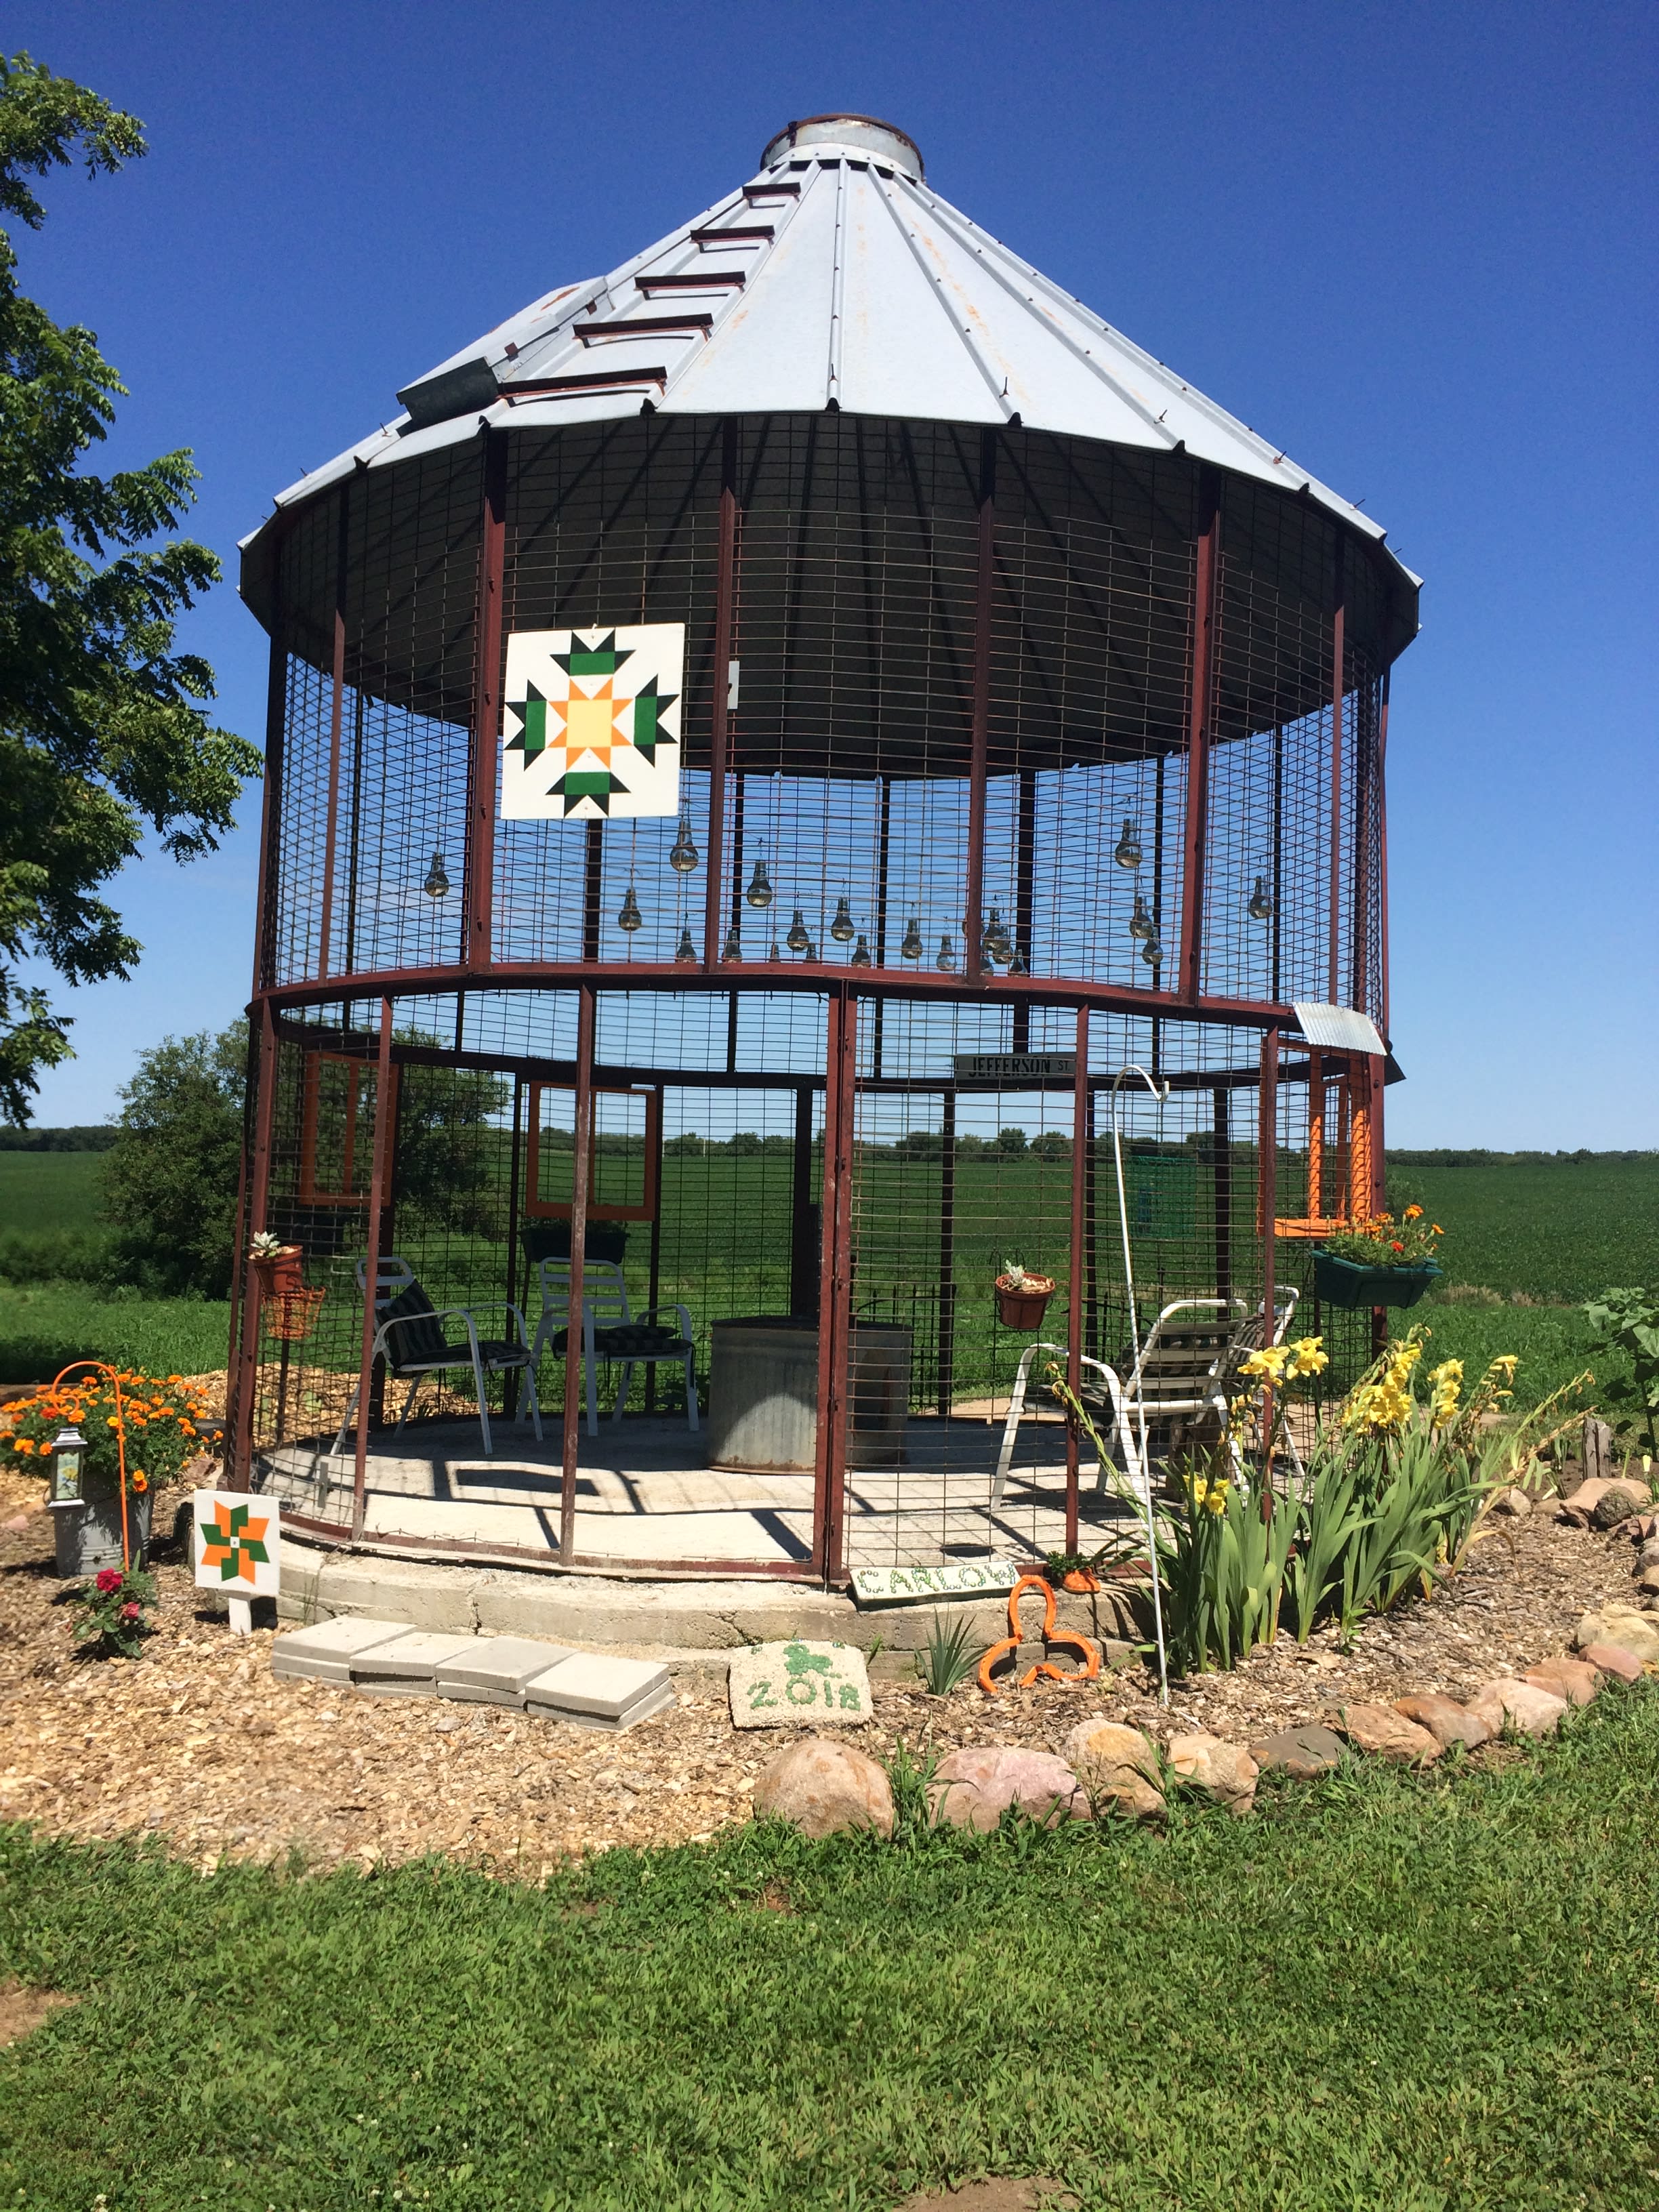 Here is our rustic grain bin area, great for hanging out under the stars.